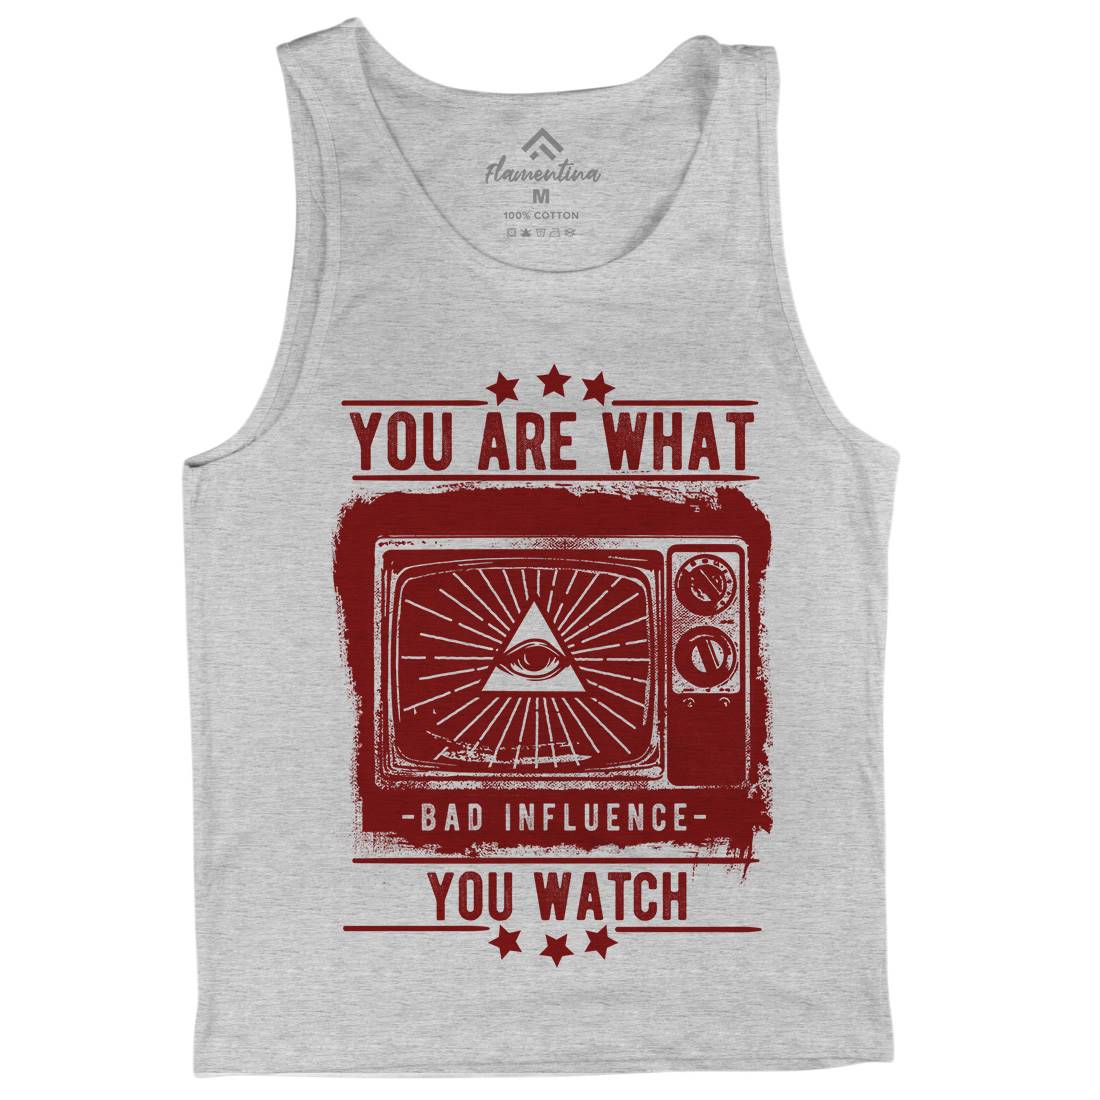 You Are What You Watch Mens Tank Top Vest Illuminati C997